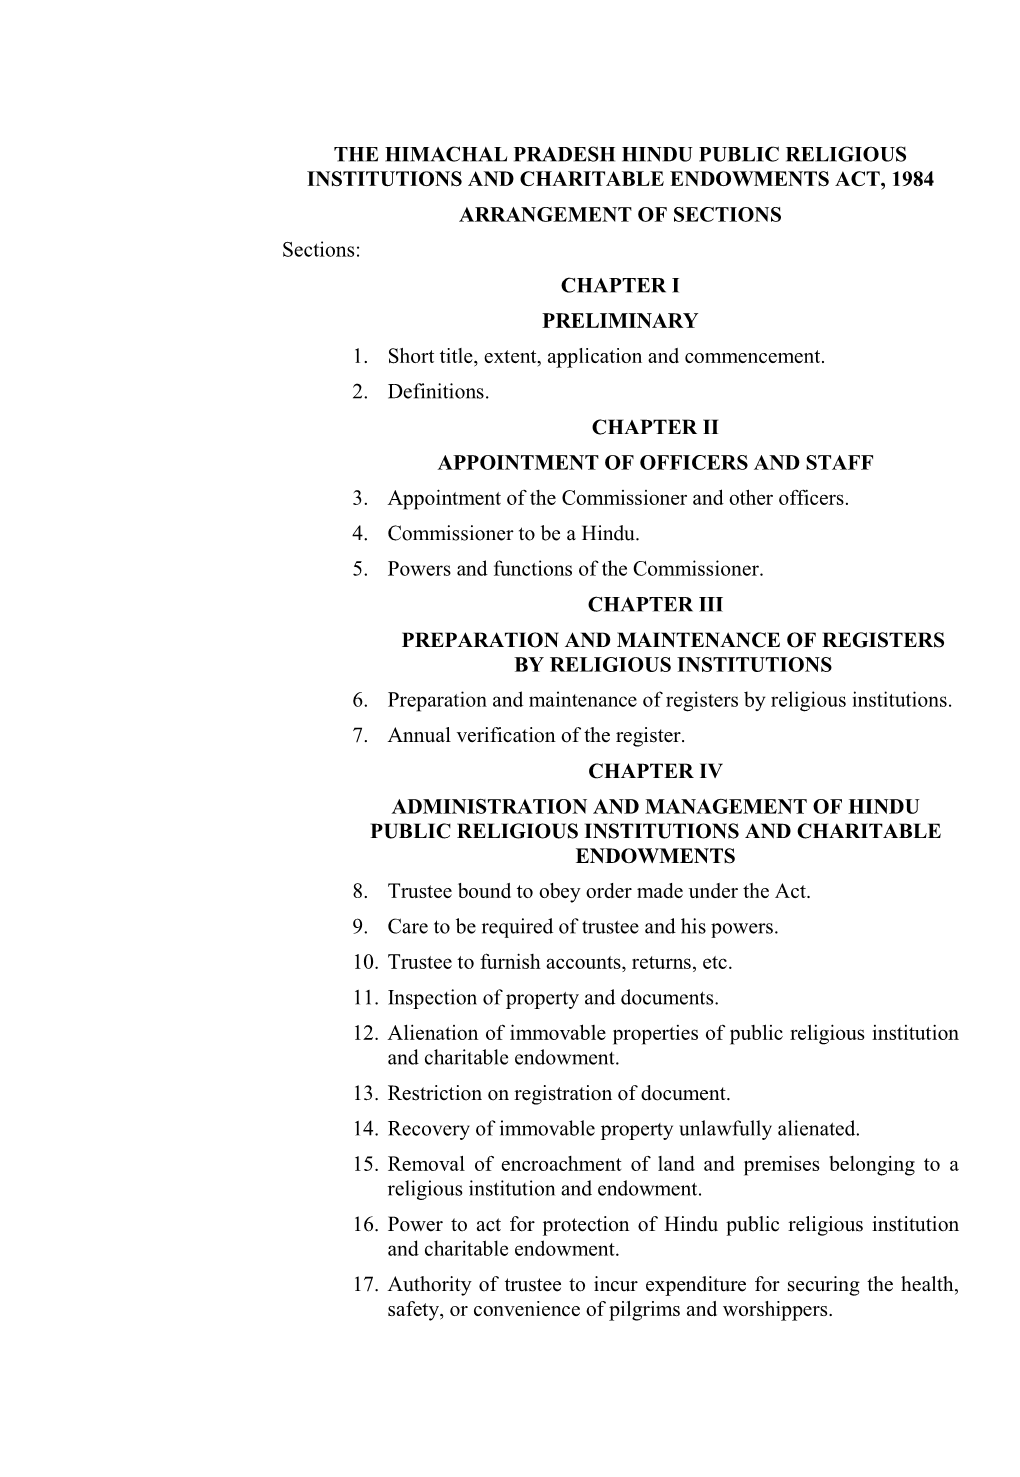 THE HIMACHAL PRADESH HINDU PUBLIC RELIGIOUS INSTITUTIONS and CHARITABLE ENDOWMENTS ACT, 1984 ARRANGEMENT of SECTIONS Sections: CHAPTER I PRELIMINARY 1